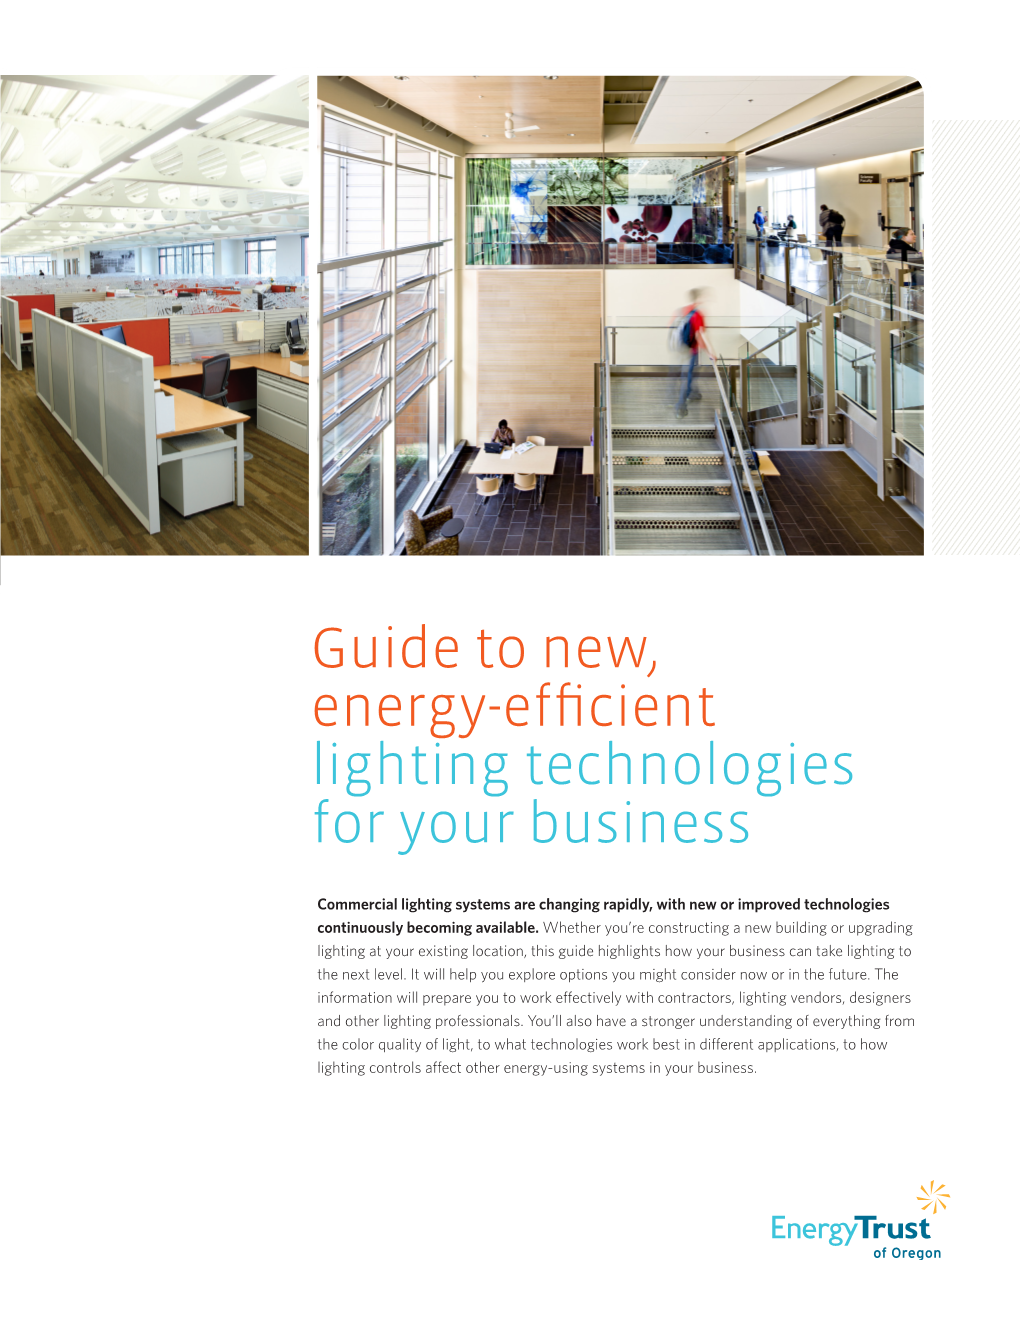 Guide to New, Energy-Efficient Lighting Technologies for Your Business